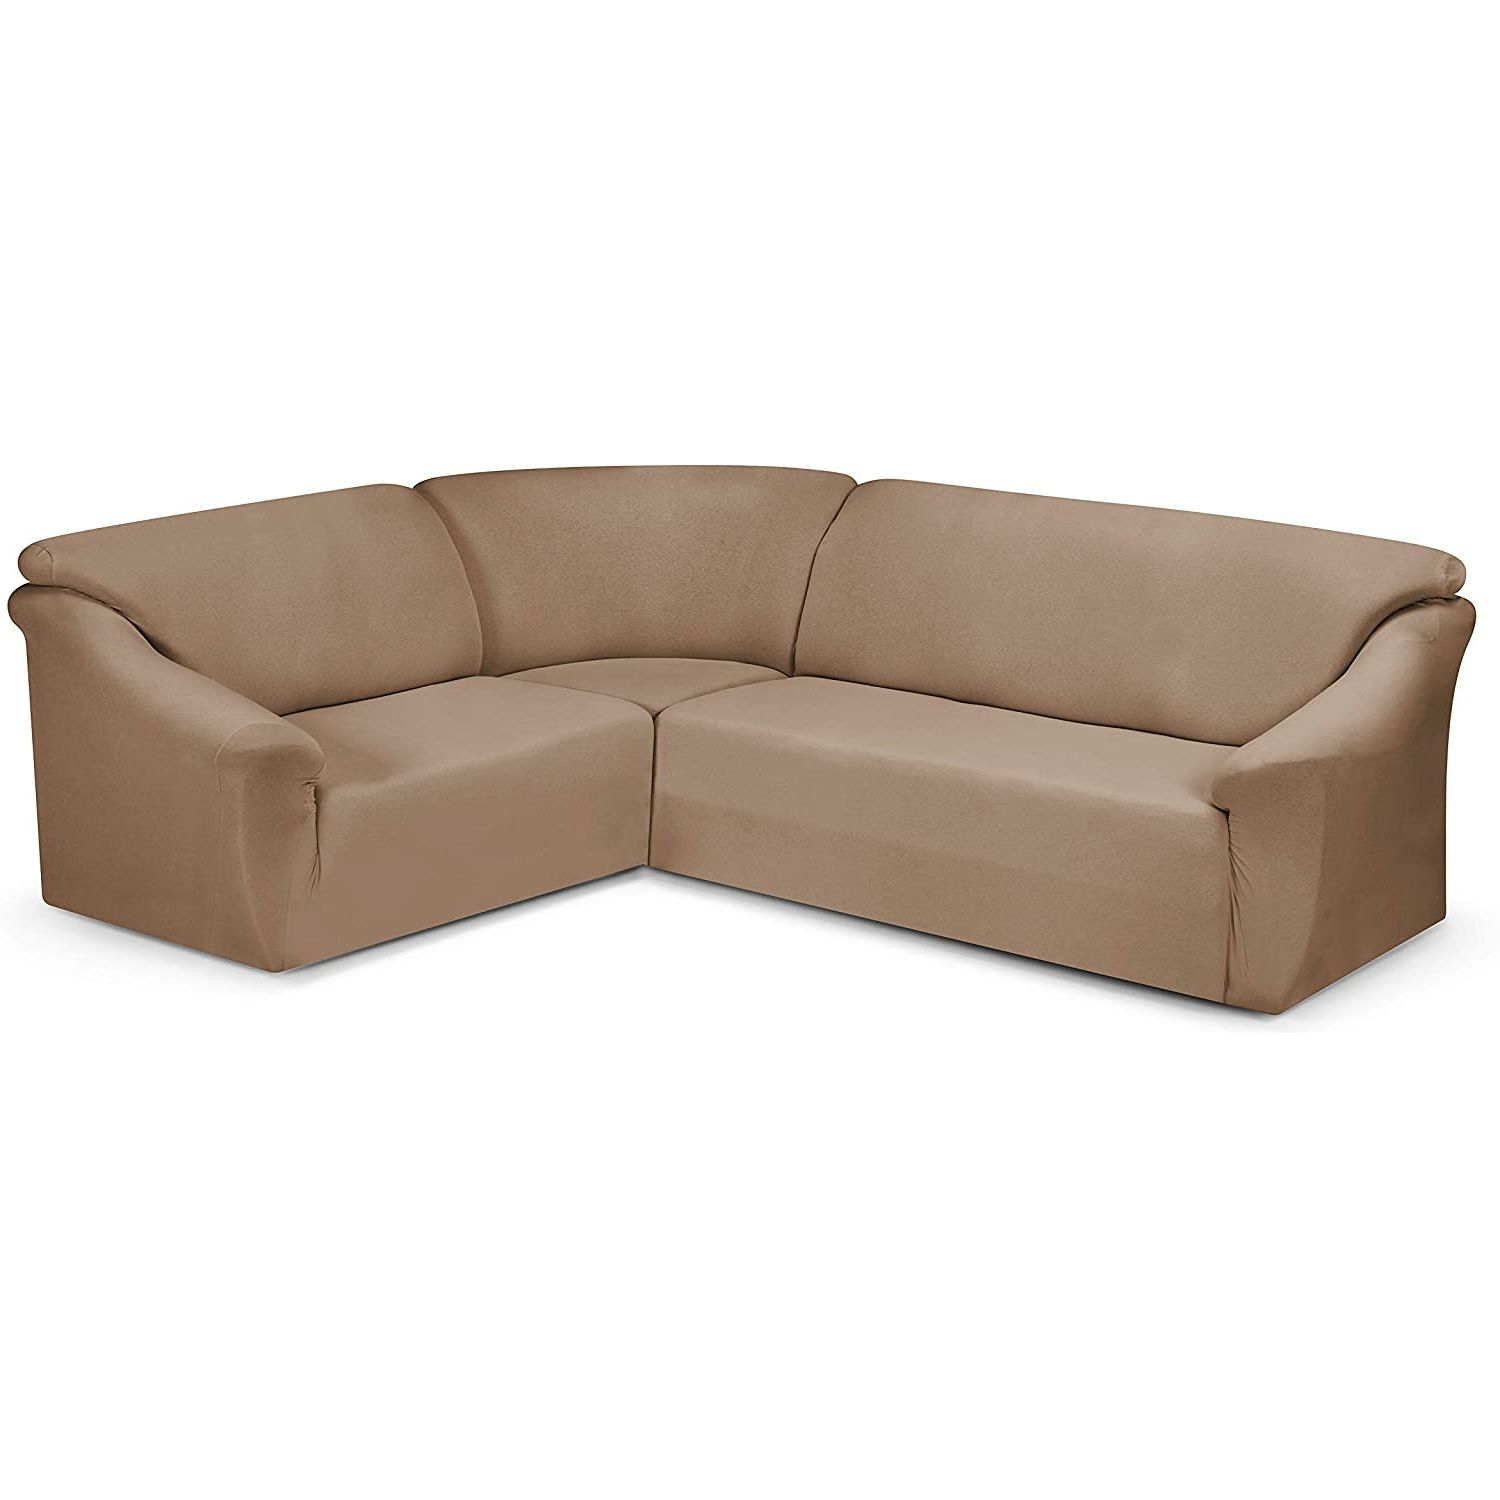 Celine Sectional Futon Sofas With Storage Camel Faux Leather For Popular Miriam Corner Sofa Camel: Amazon.co (View 7 of 25)